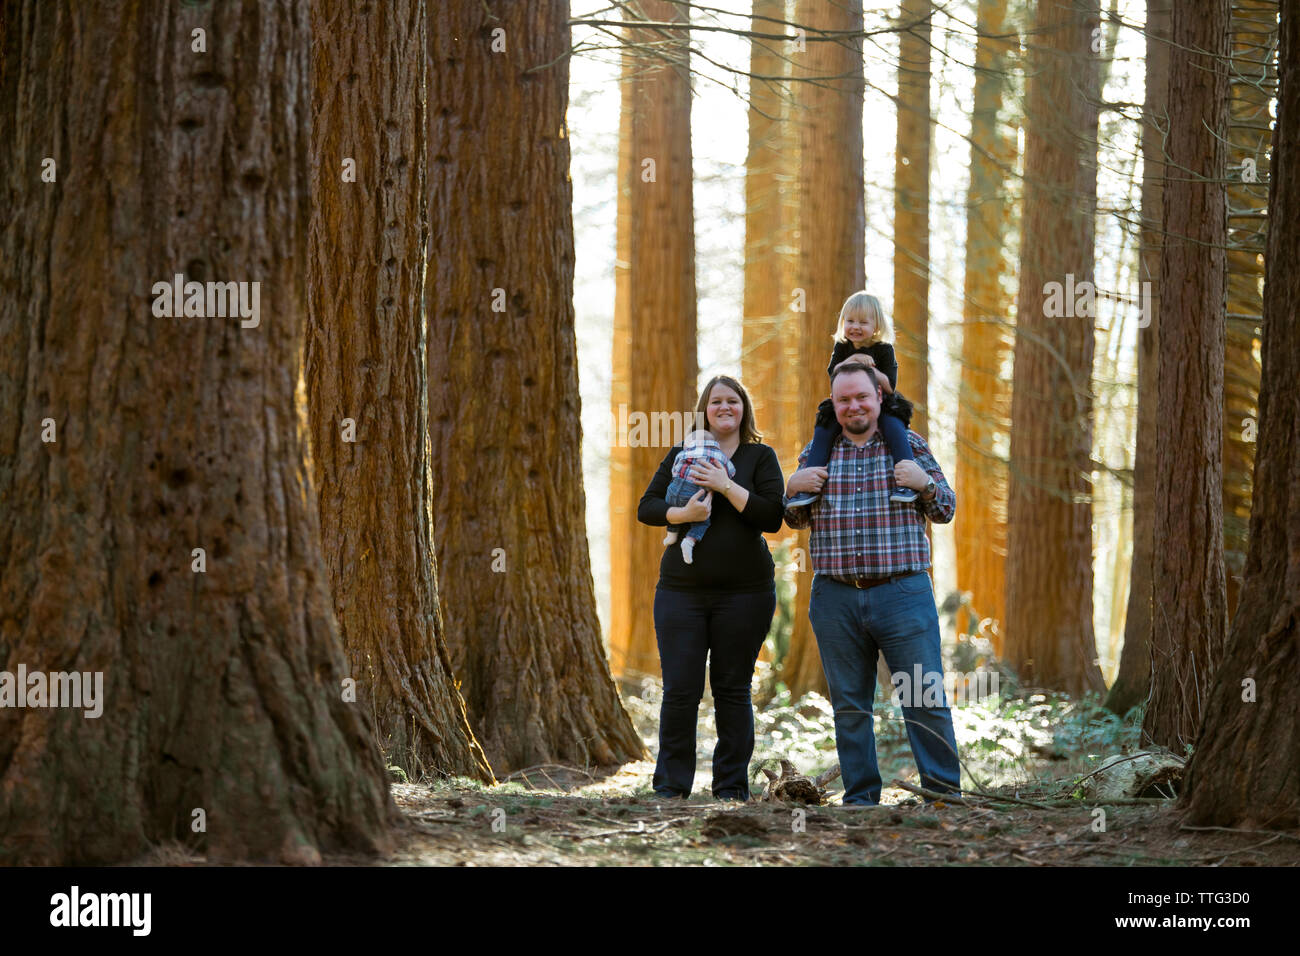 Family of four smiling in a forest setting Stock Photo